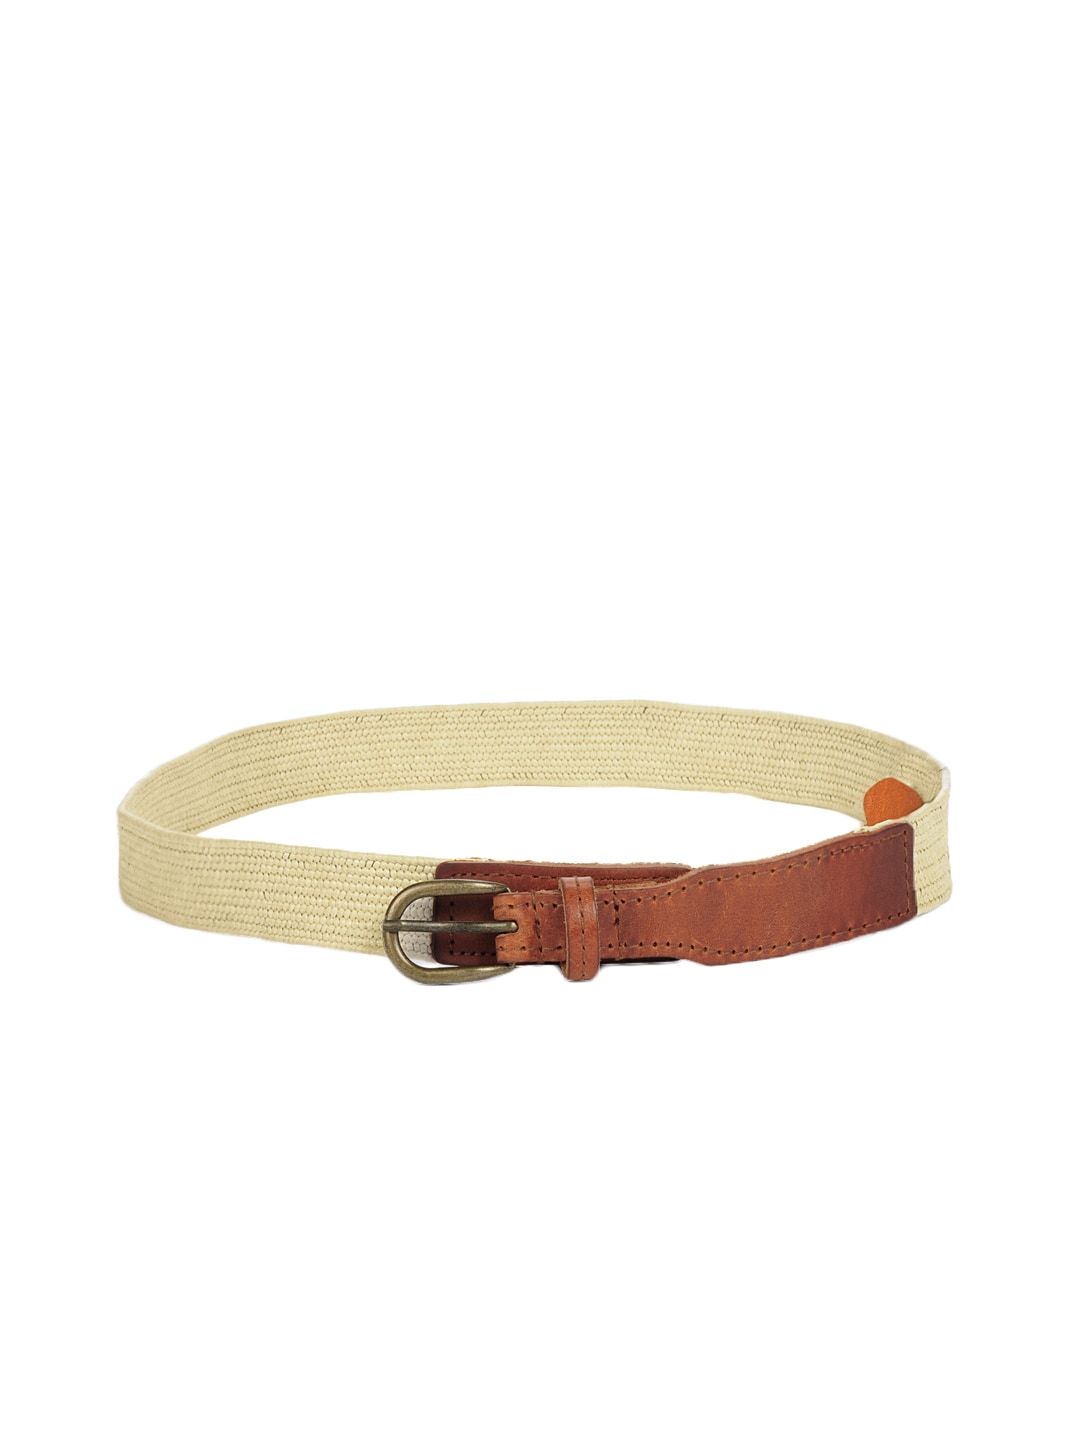 French Connection Women Tan Belt